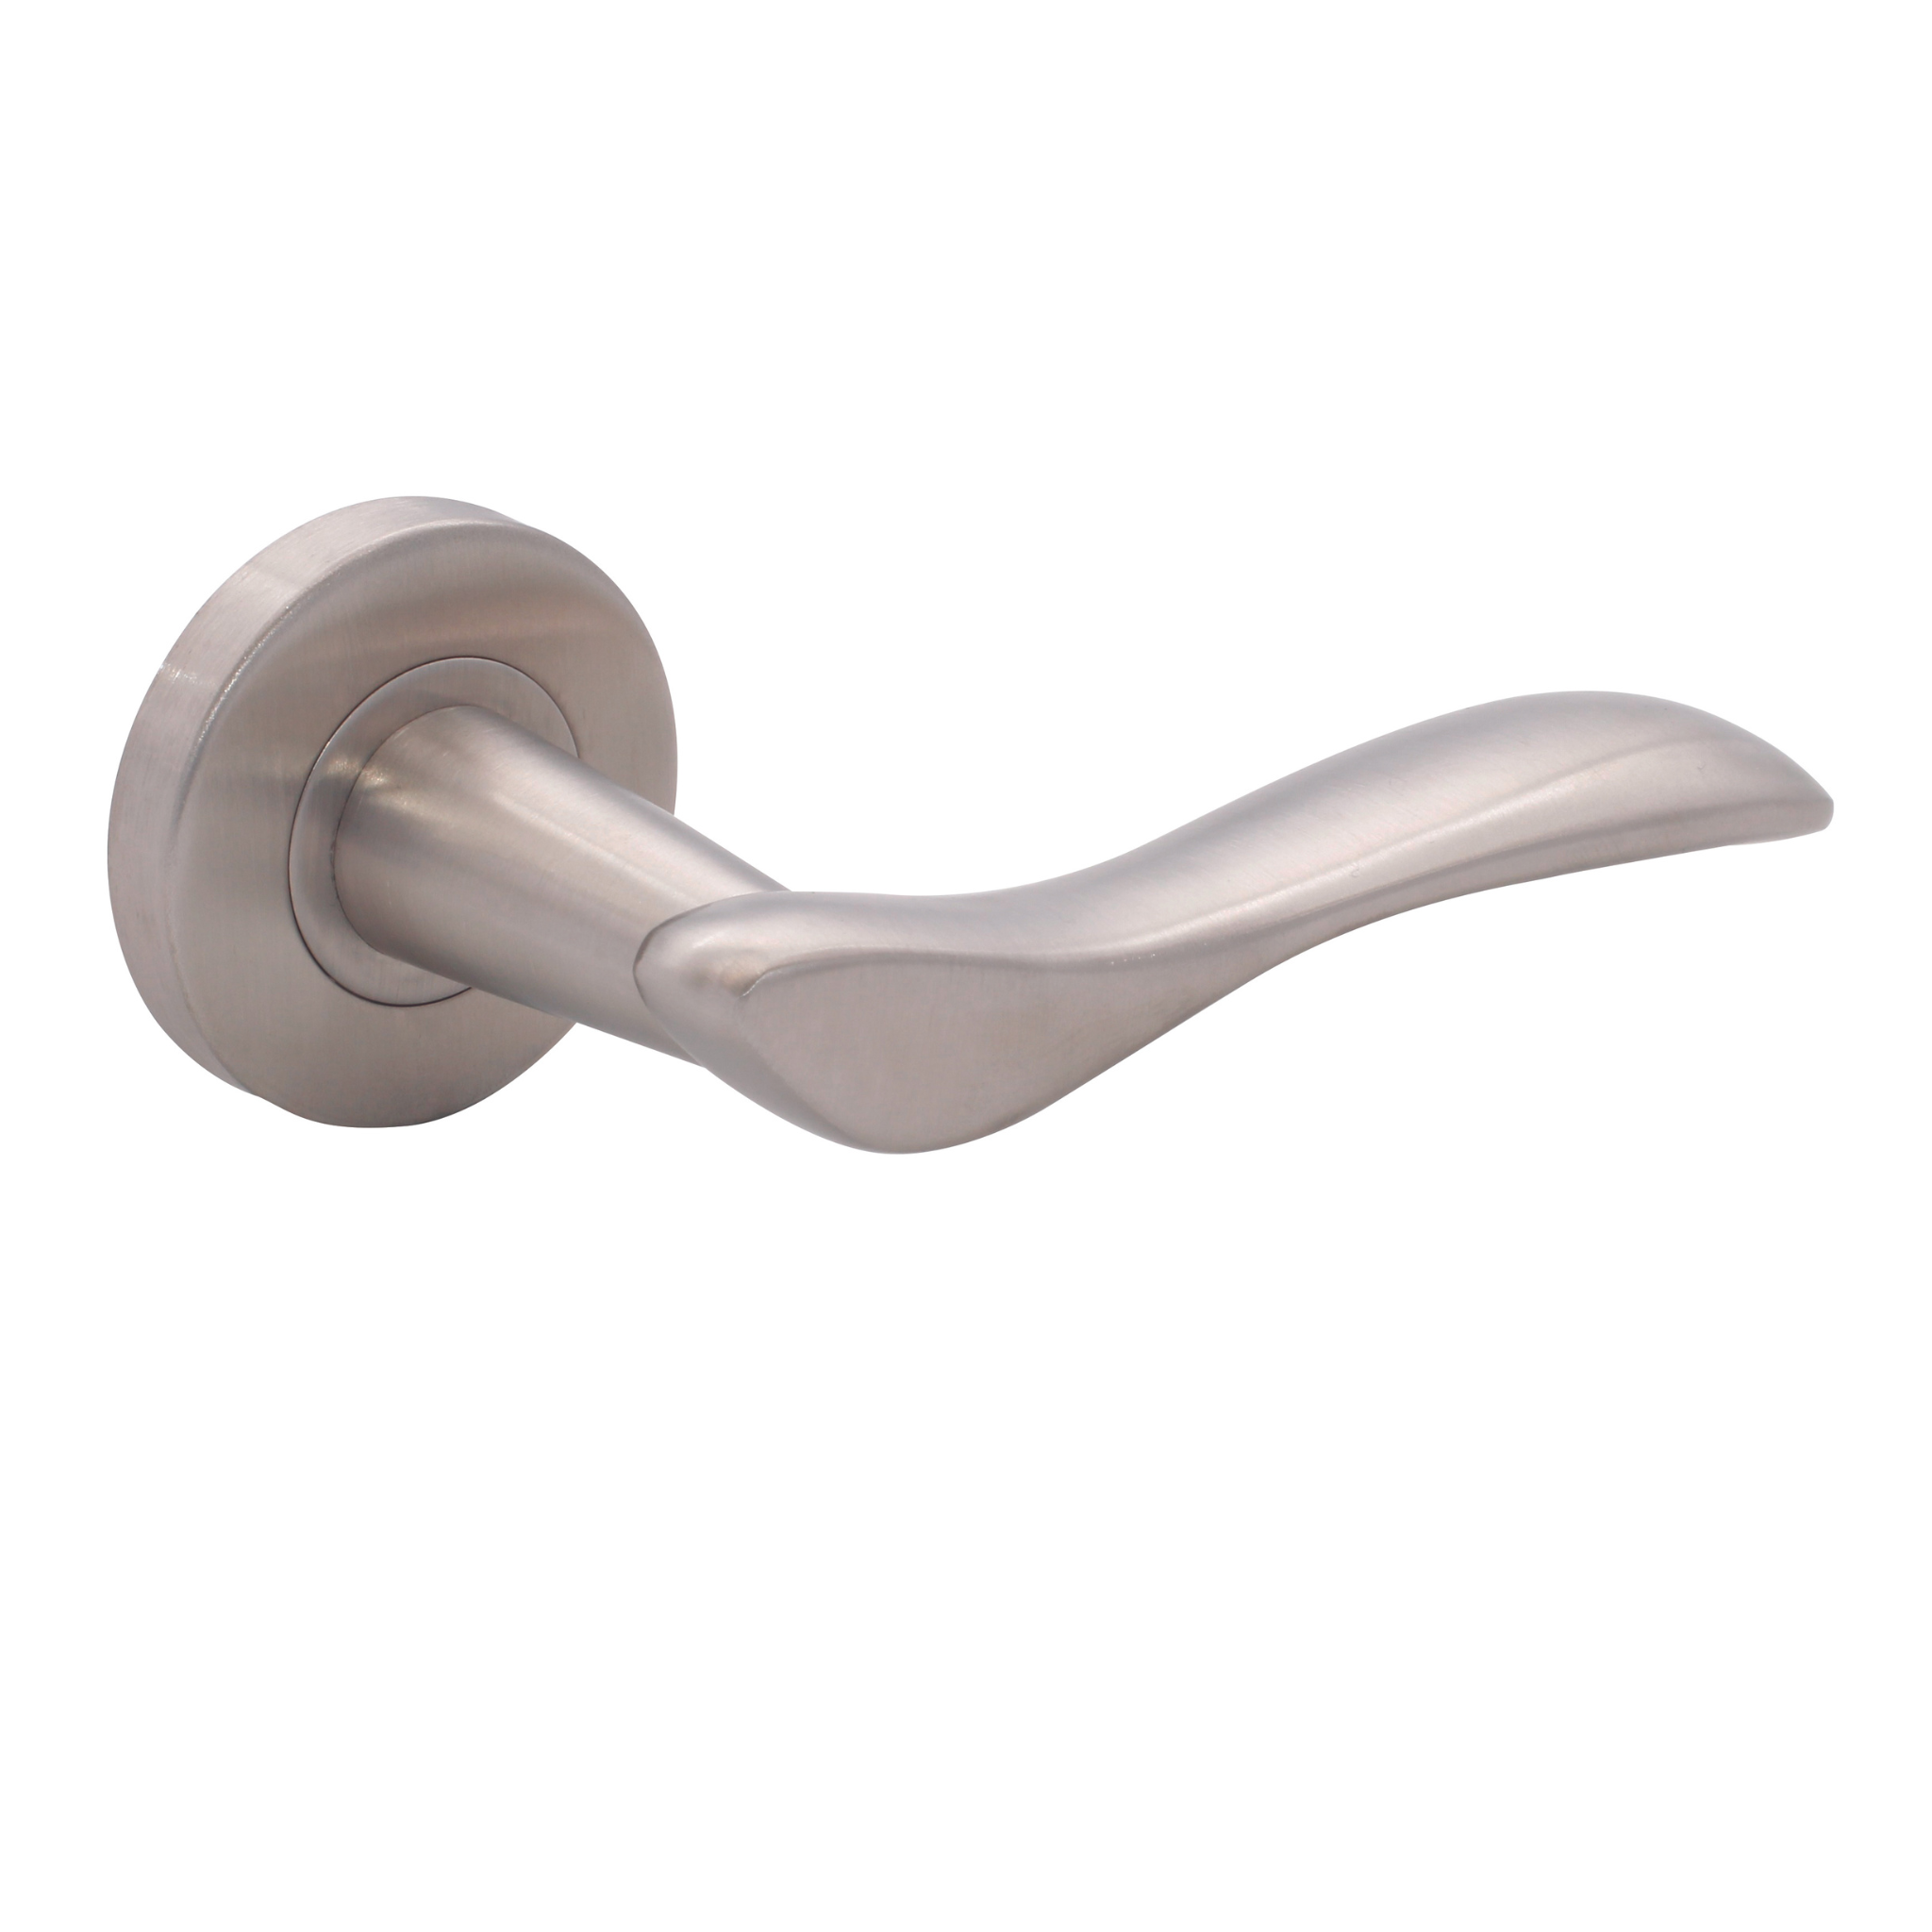 FS108.R._.SS, Lever Handles, Solid, On Round Rose, With Escutcheons, Stainless Steel, CISA